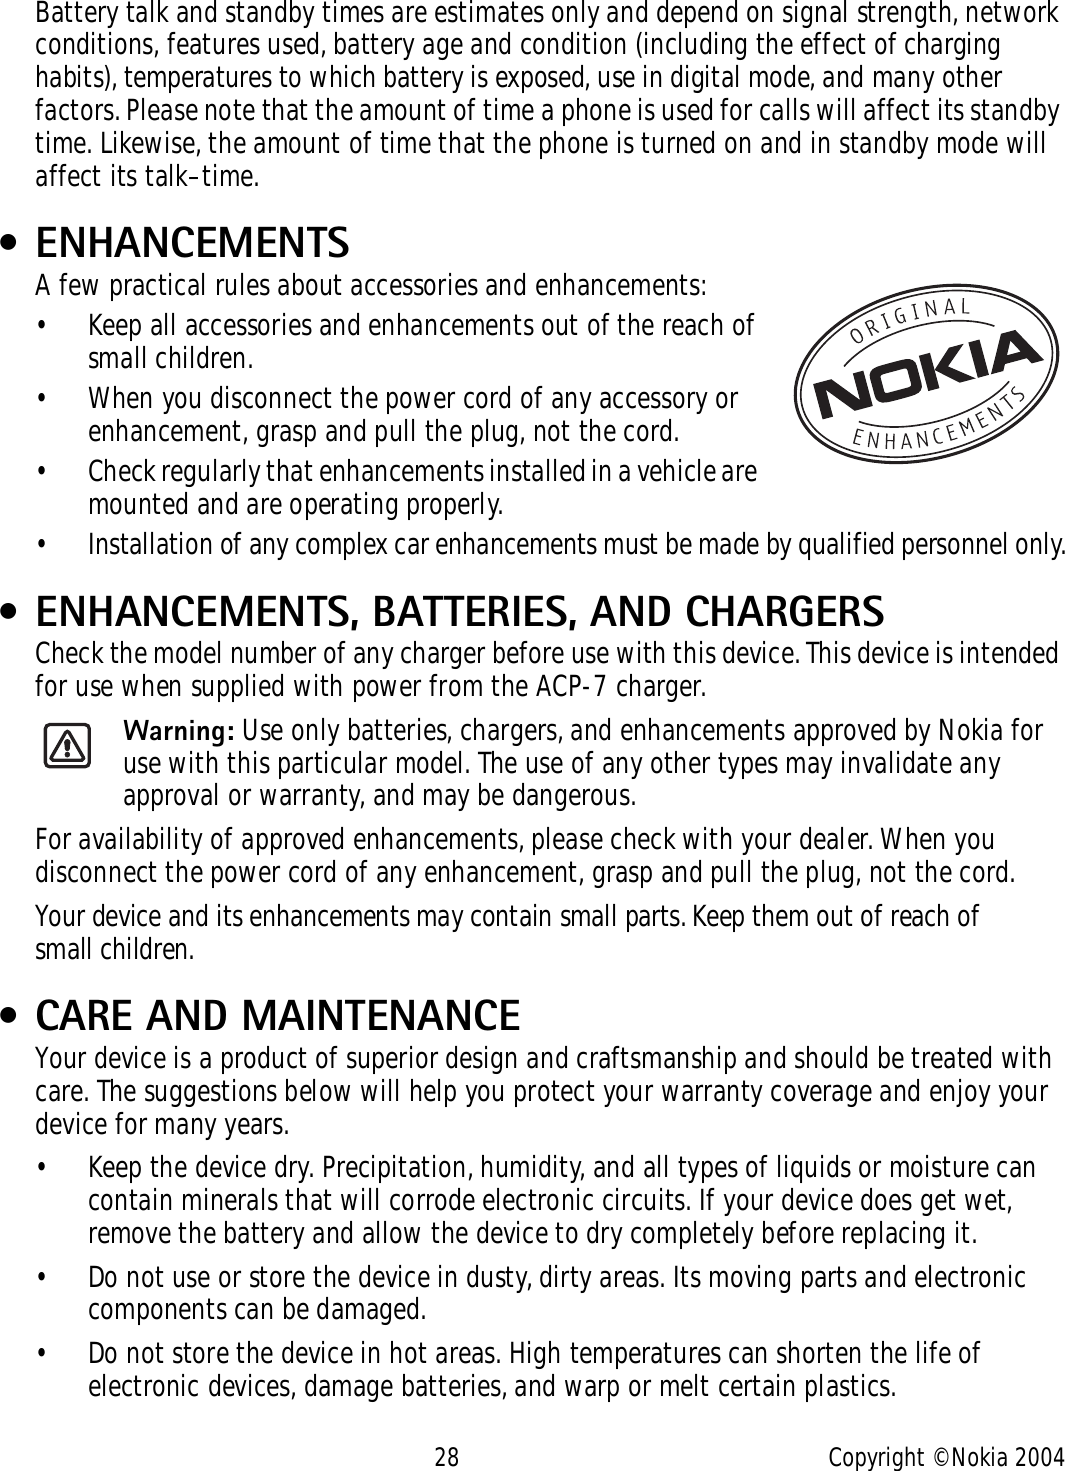 28 Copyright © Nokia 2004Battery talk and standby times are estimates only and depend on signal strength, network conditions, features used, battery age and condition (including the effect of charging habits), temperatures to which battery is exposed, use in digital mode, and many other factors. Please note that the amount of time a phone is used for calls will affect its standby time. Likewise, the amount of time that the phone is turned on and in standby mode will affect its talk–time. • ENHANCEMENTSA few practical rules about accessories and enhancements:• Keep all accessories and enhancements out of the reach of small children.• When you disconnect the power cord of any accessory or enhancement, grasp and pull the plug, not the cord.• Check regularly that enhancements installed in a vehicle are mounted and are operating properly.• Installation of any complex car enhancements must be made by qualified personnel only. • ENHANCEMENTS, BATTERIES, AND CHARGERSCheck the model number of any charger before use with this device. This device is intended for use when supplied with power from the ACP-7 charger.Warning: Use only batteries, chargers, and enhancements approved by Nokia for use with this particular model. The use of any other types may invalidate any approval or warranty, and may be dangerous.For availability of approved enhancements, please check with your dealer. When you disconnect the power cord of any enhancement, grasp and pull the plug, not the cord.Your device and its enhancements may contain small parts. Keep them out of reach of small children. • CARE AND MAINTENANCEYour device is a product of superior design and craftsmanship and should be treated with care. The suggestions below will help you protect your warranty coverage and enjoy your device for many years.• Keep the device dry. Precipitation, humidity, and all types of liquids or moisture can contain minerals that will corrode electronic circuits. If your device does get wet, remove the battery and allow the device to dry completely before replacing it.• Do not use or store the device in dusty, dirty areas. Its moving parts and electronic components can be damaged.• Do not store the device in hot areas. High temperatures can shorten the life of electronic devices, damage batteries, and warp or melt certain plastics.